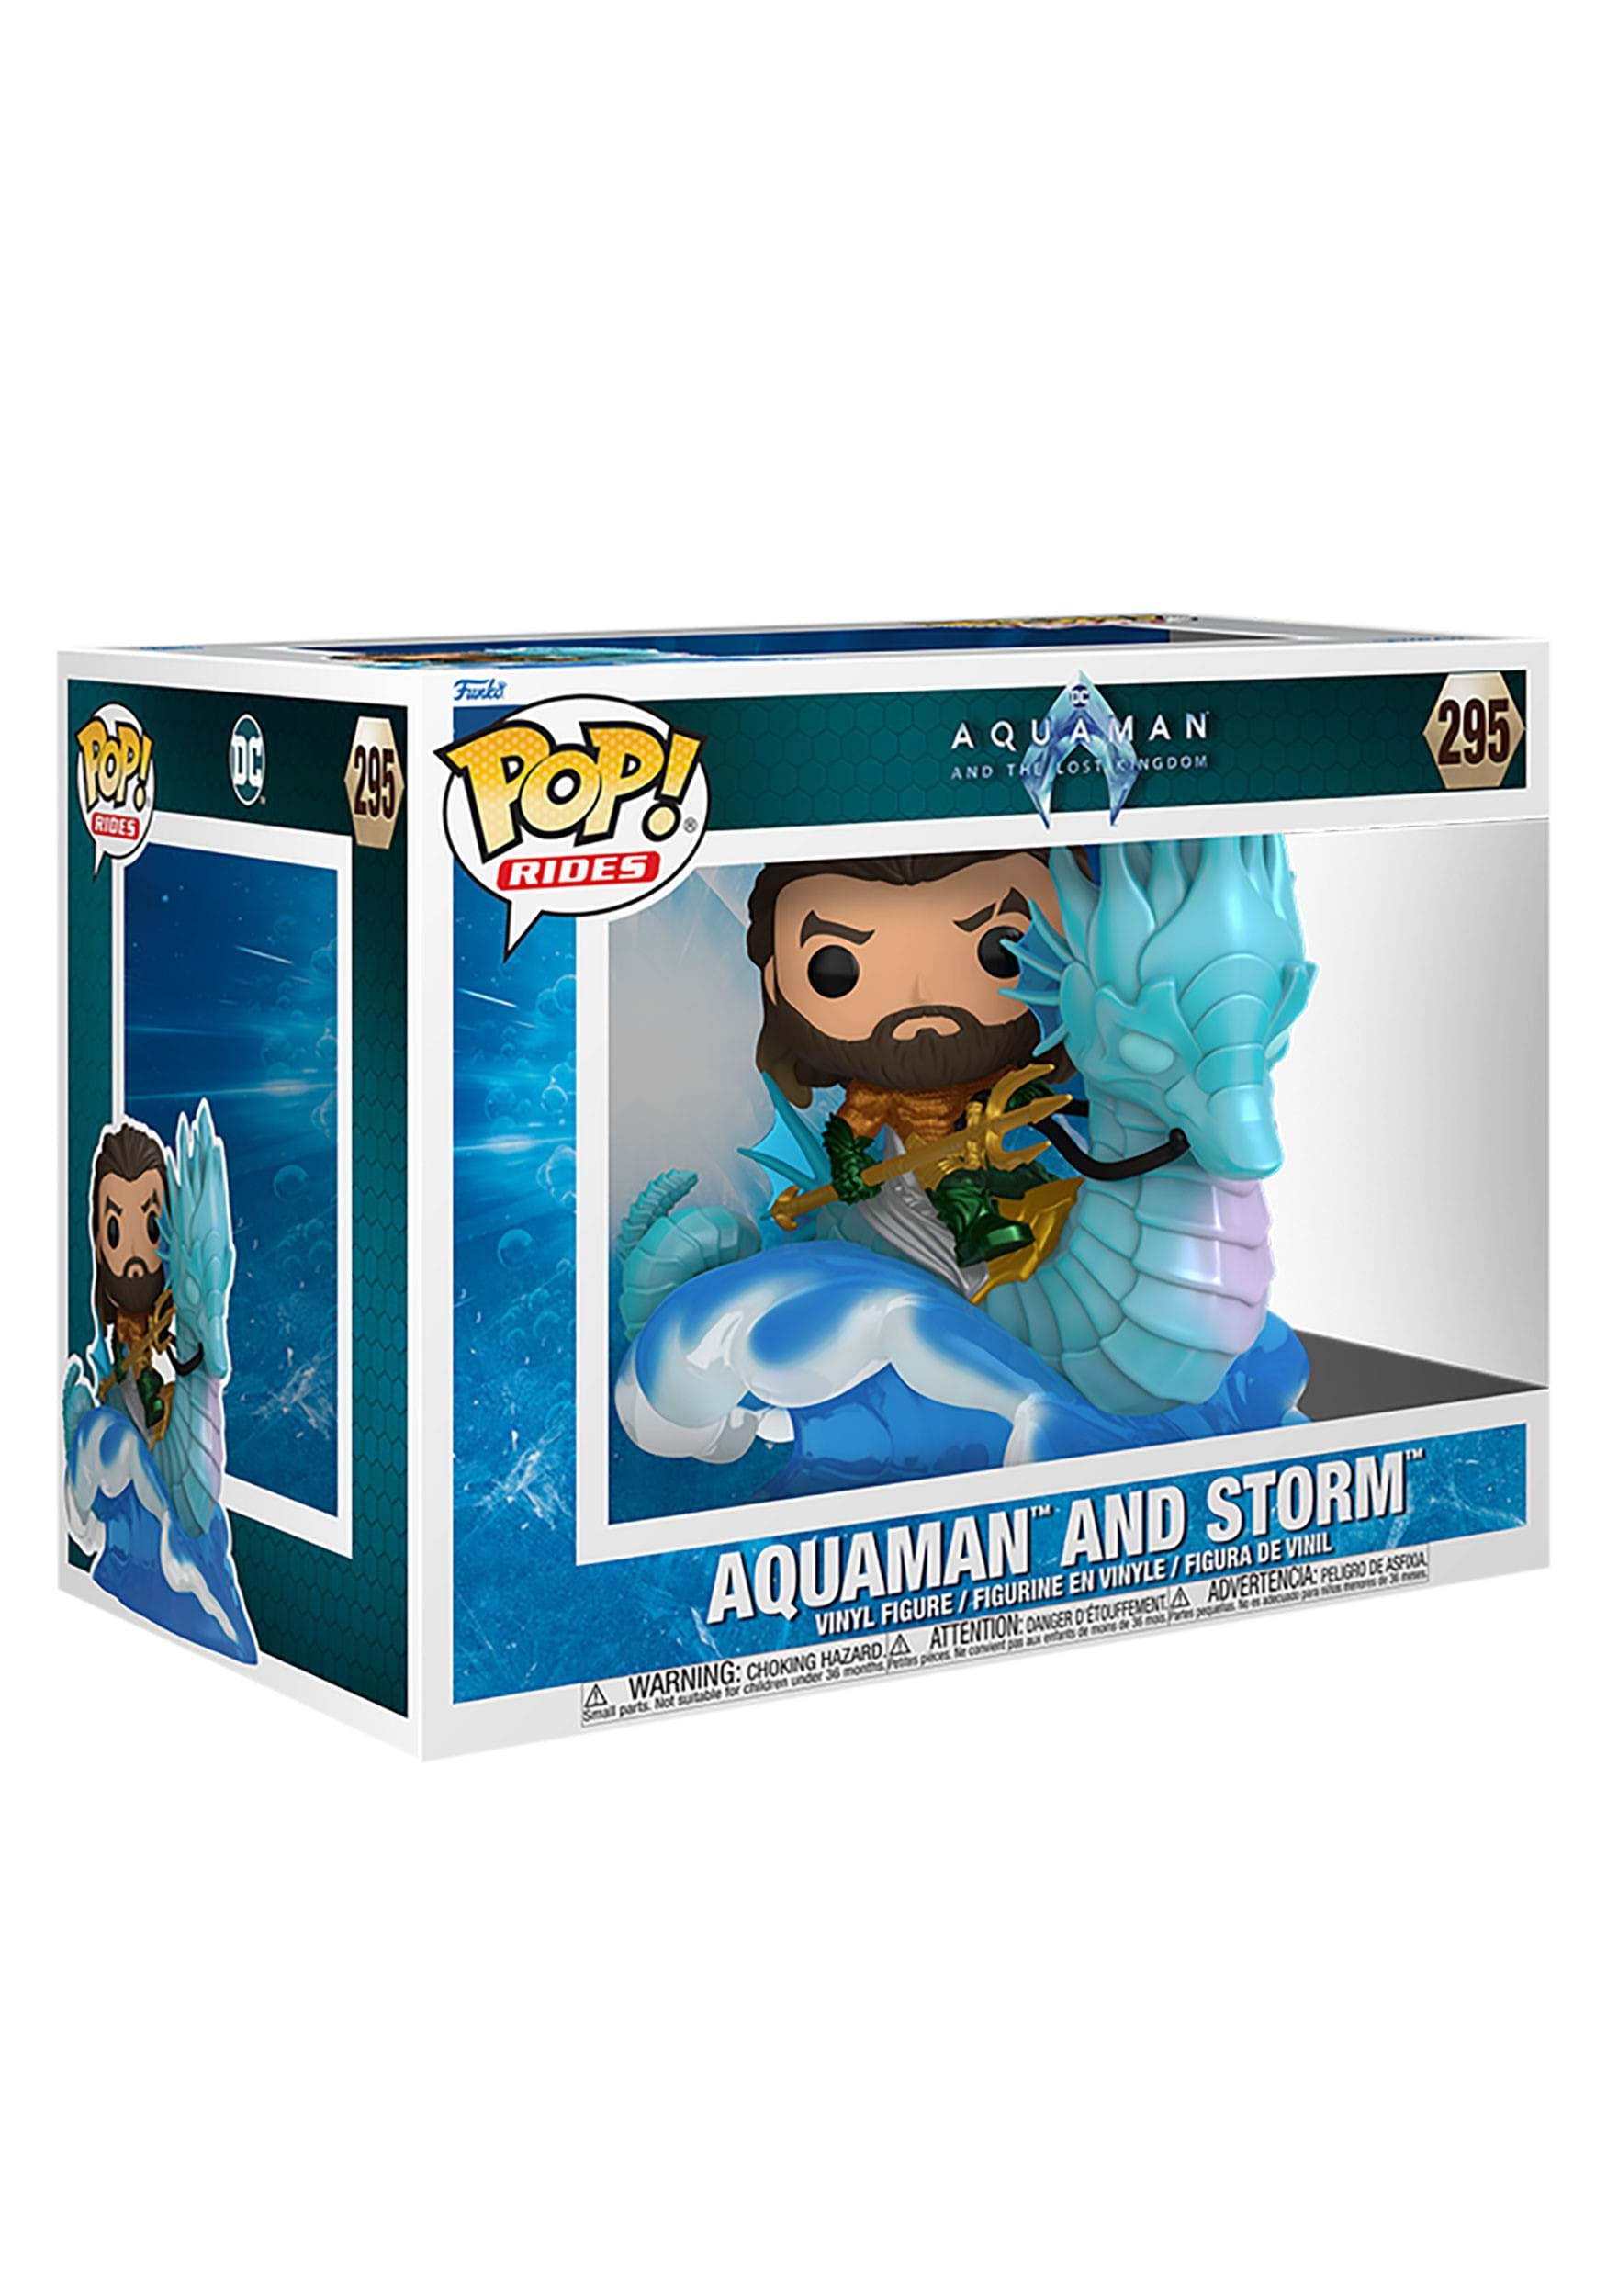 Aquaman Stands with Pitchfork Onesies sold by Eric Lewis | SKU 40734191 |  20% OFF Printerval